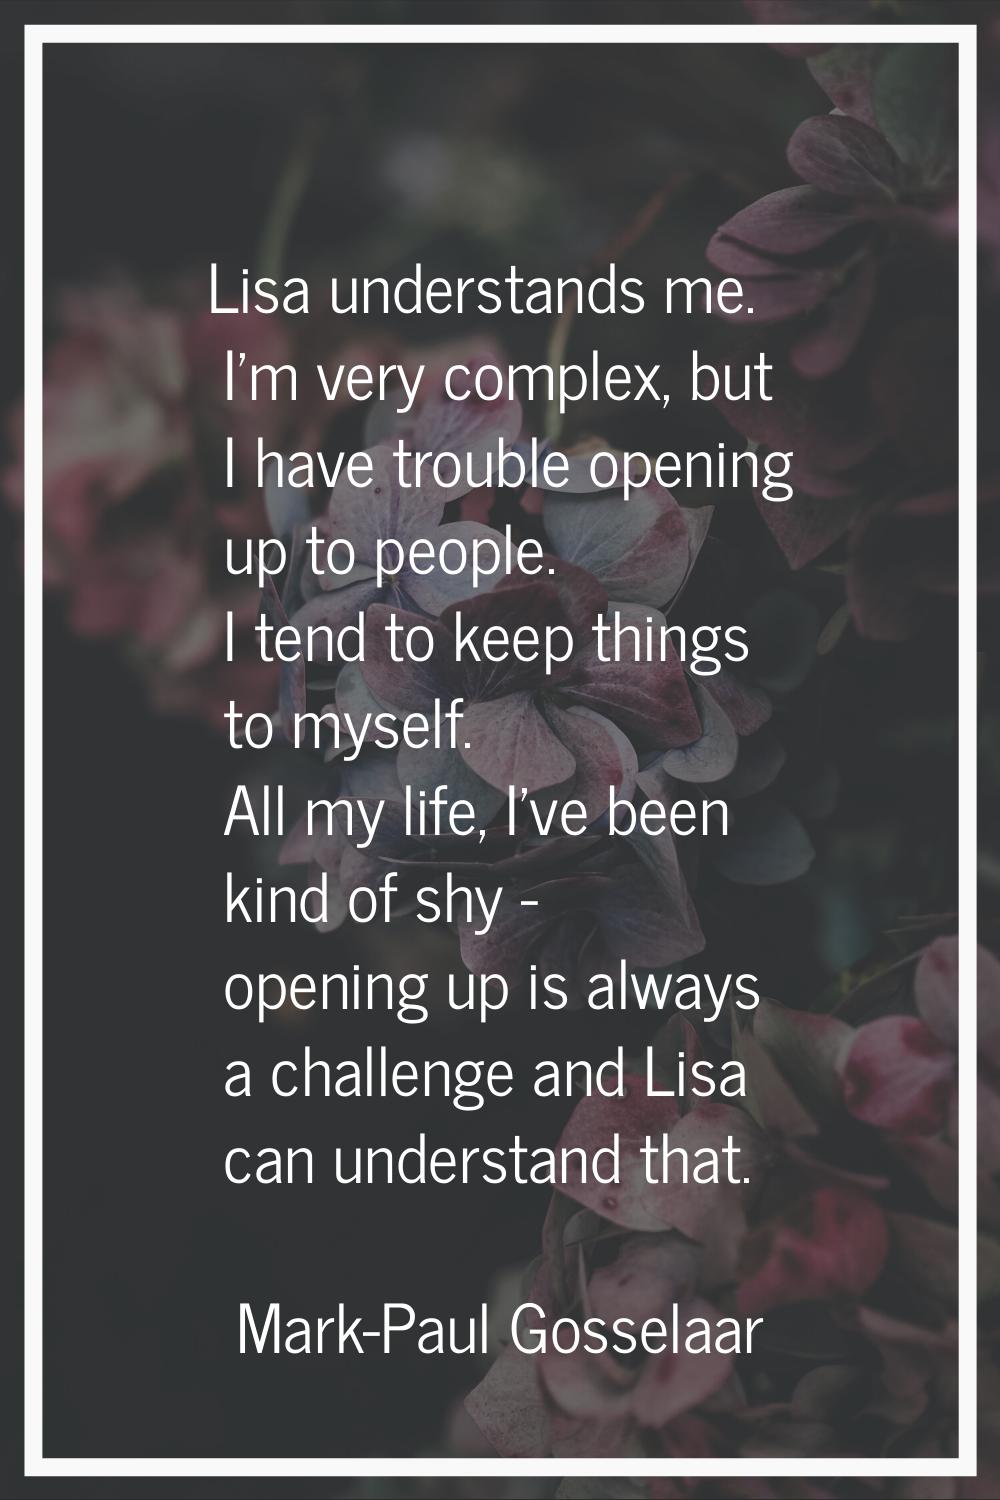 Lisa understands me. I'm very complex, but I have trouble opening up to people. I tend to keep thin